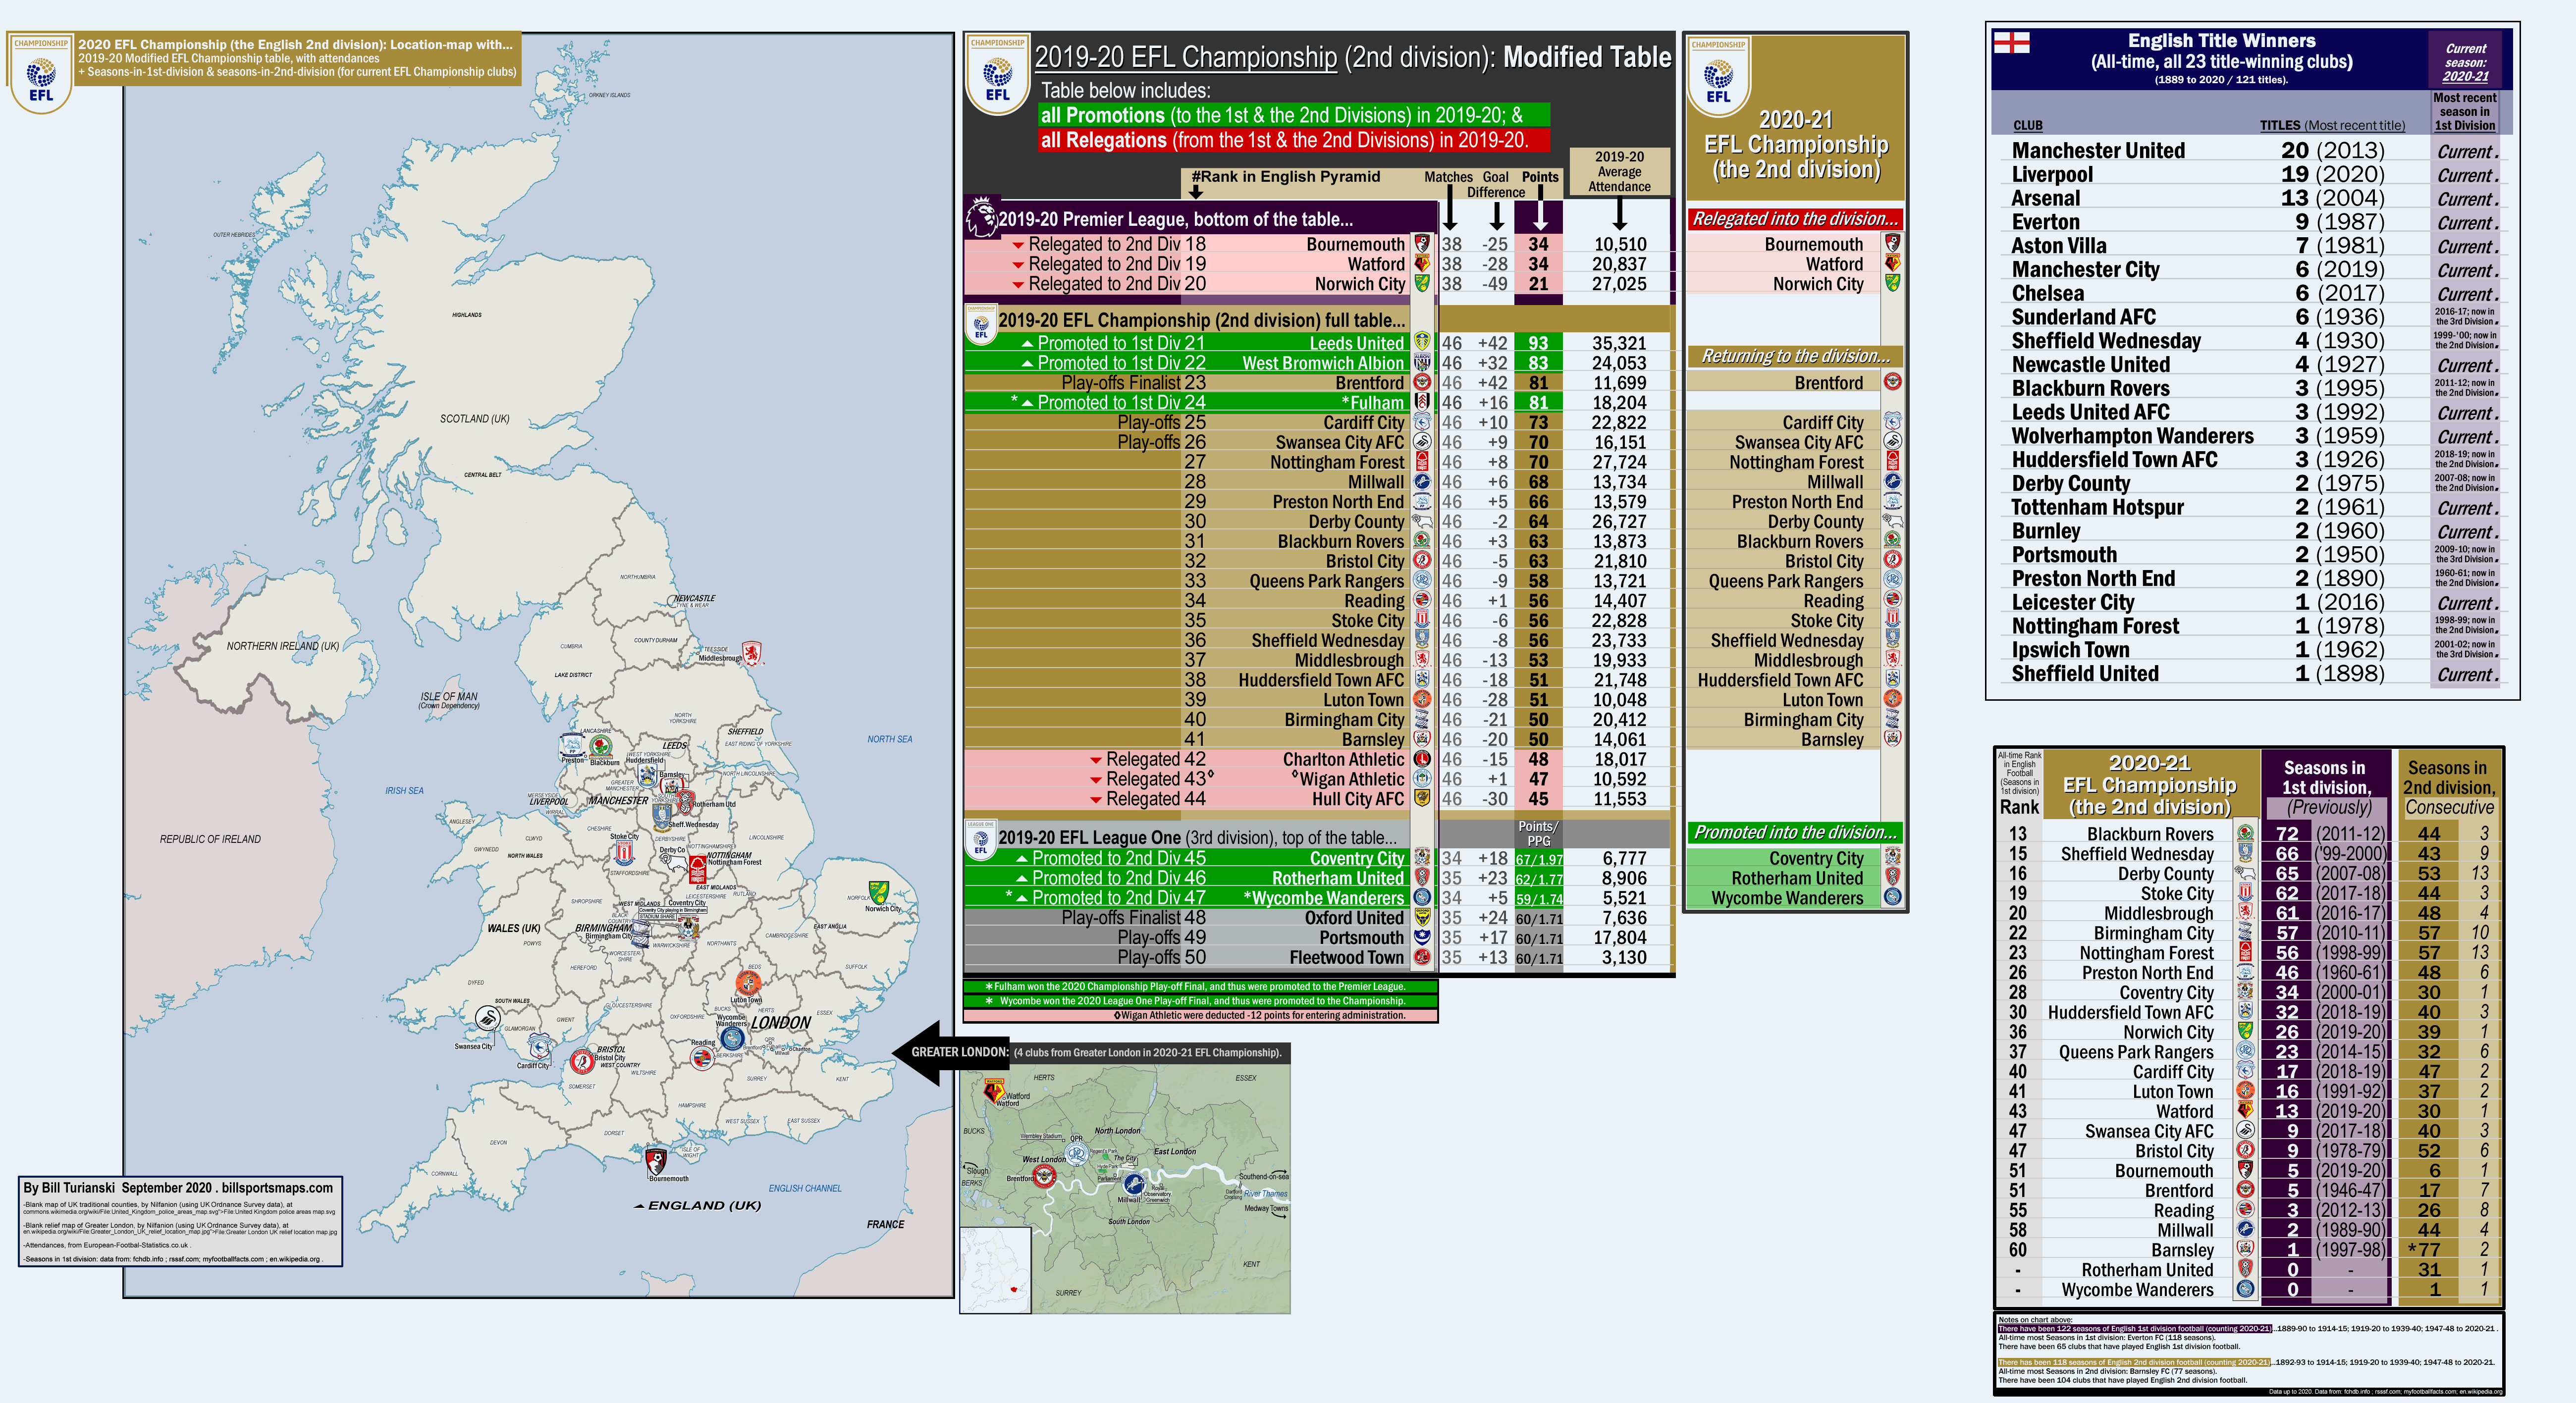 2020-21 EFL Championship location-map, with 2019-20 Modified table